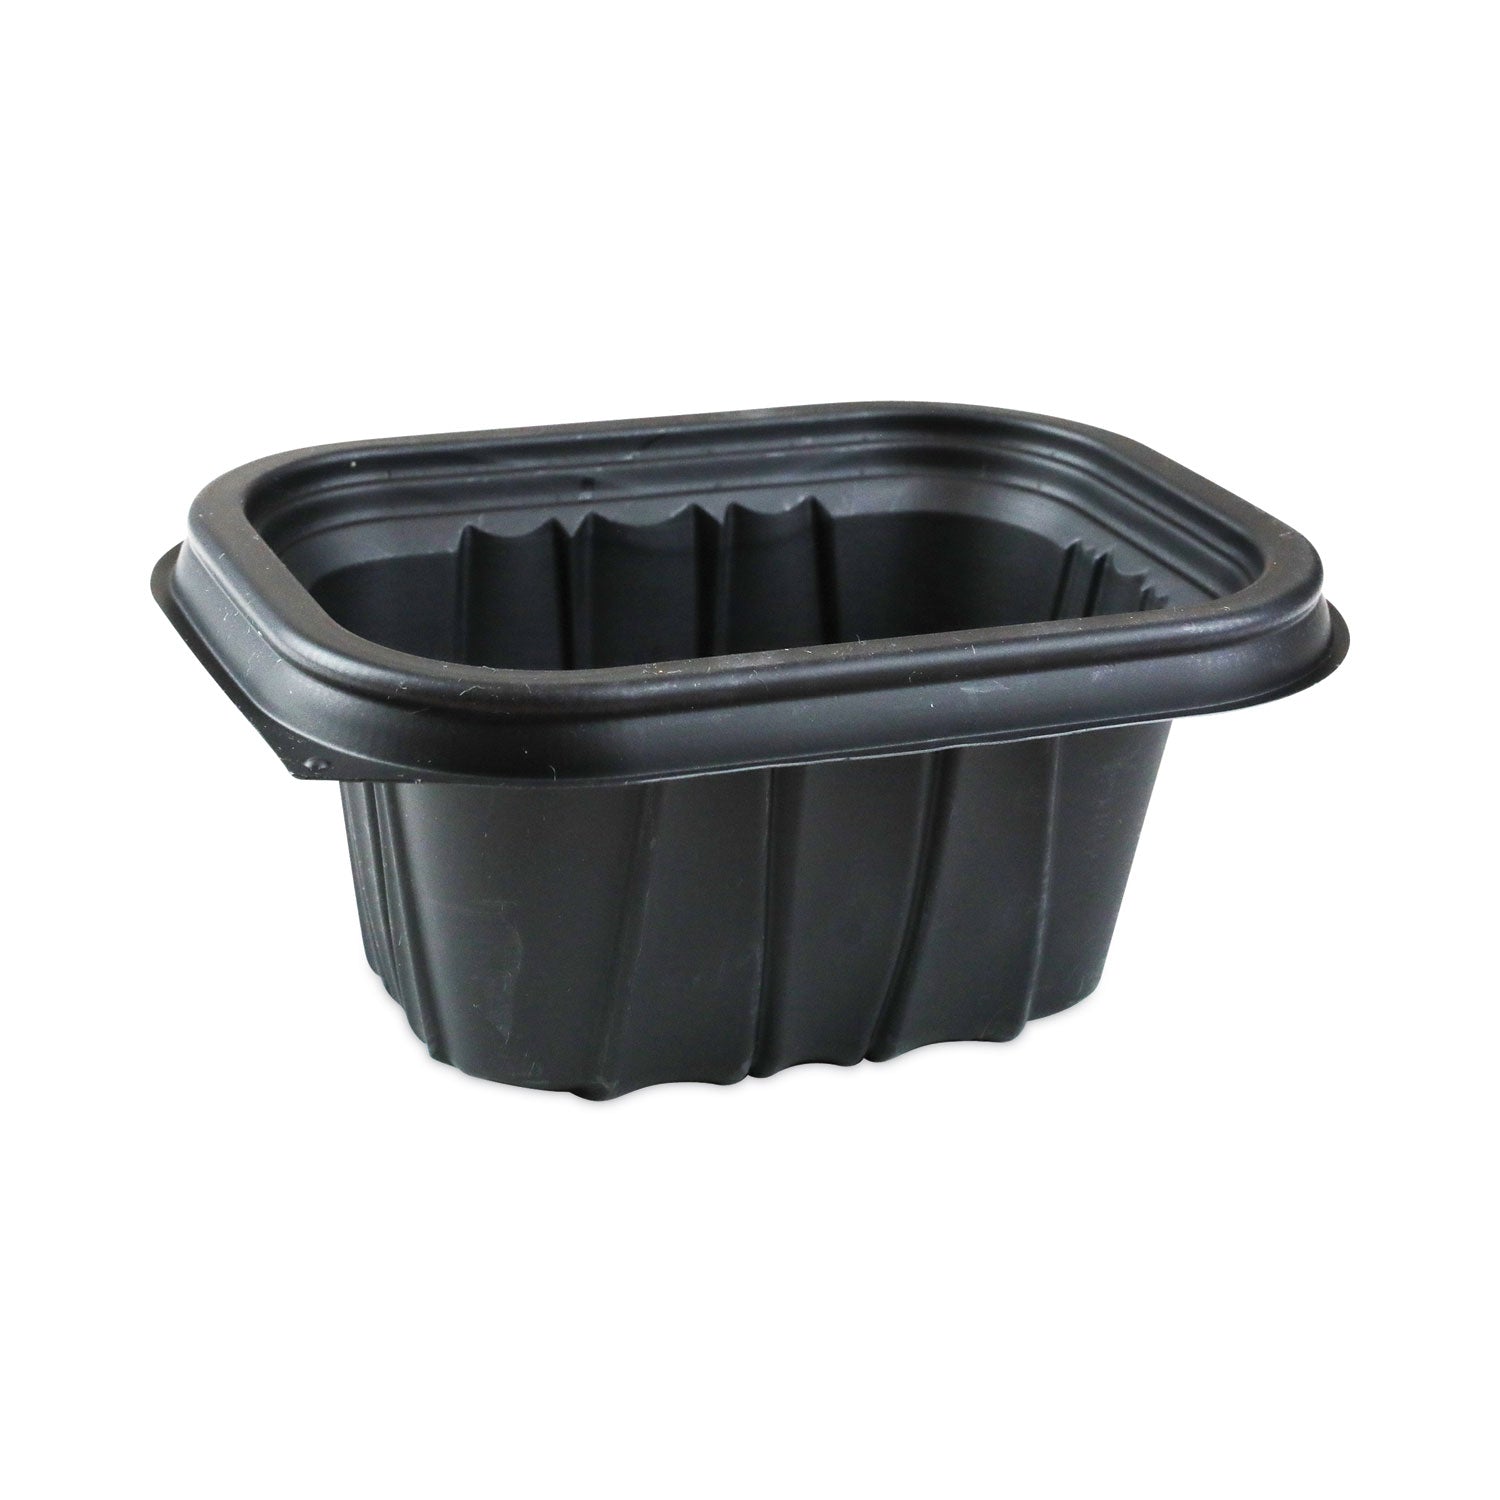 earthchoice-entree2go-takeout-container-12-oz-565-x-425-x-257-black-plastic-600-carton_pctycnb6x412000 - 1